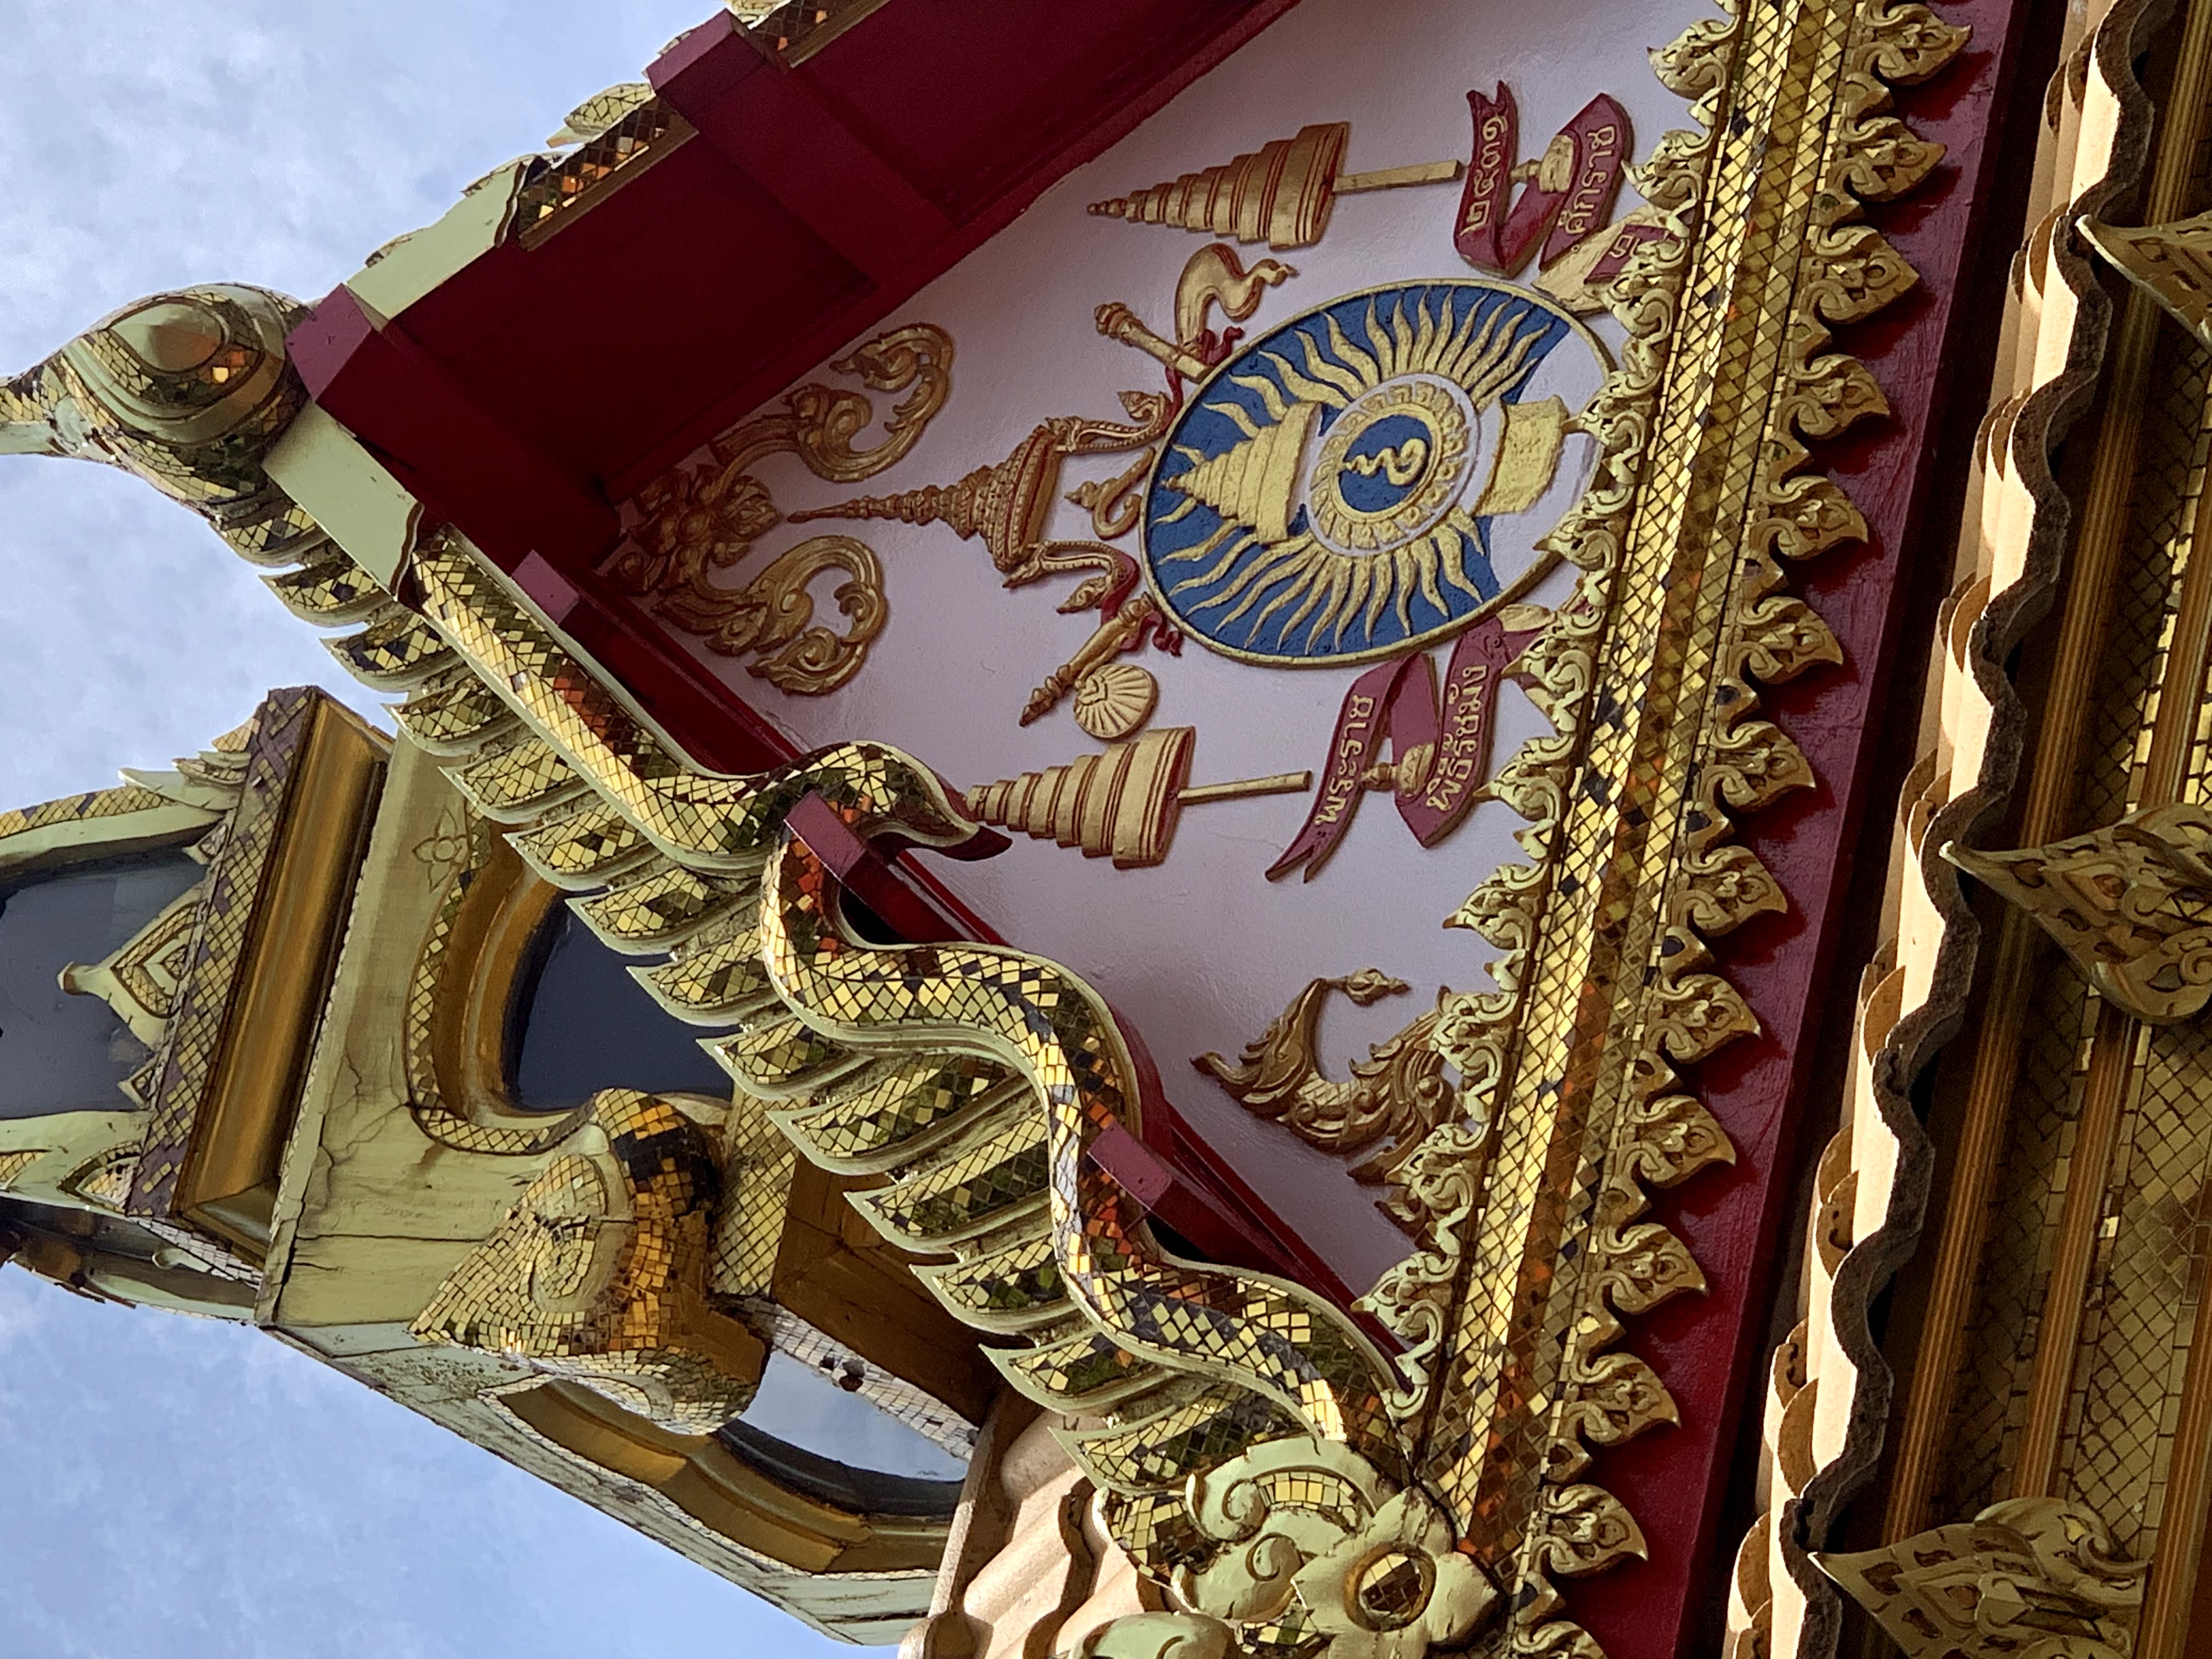 Color photograph, detail view of gazebo gable with painted wood, gilded wood, and a crest